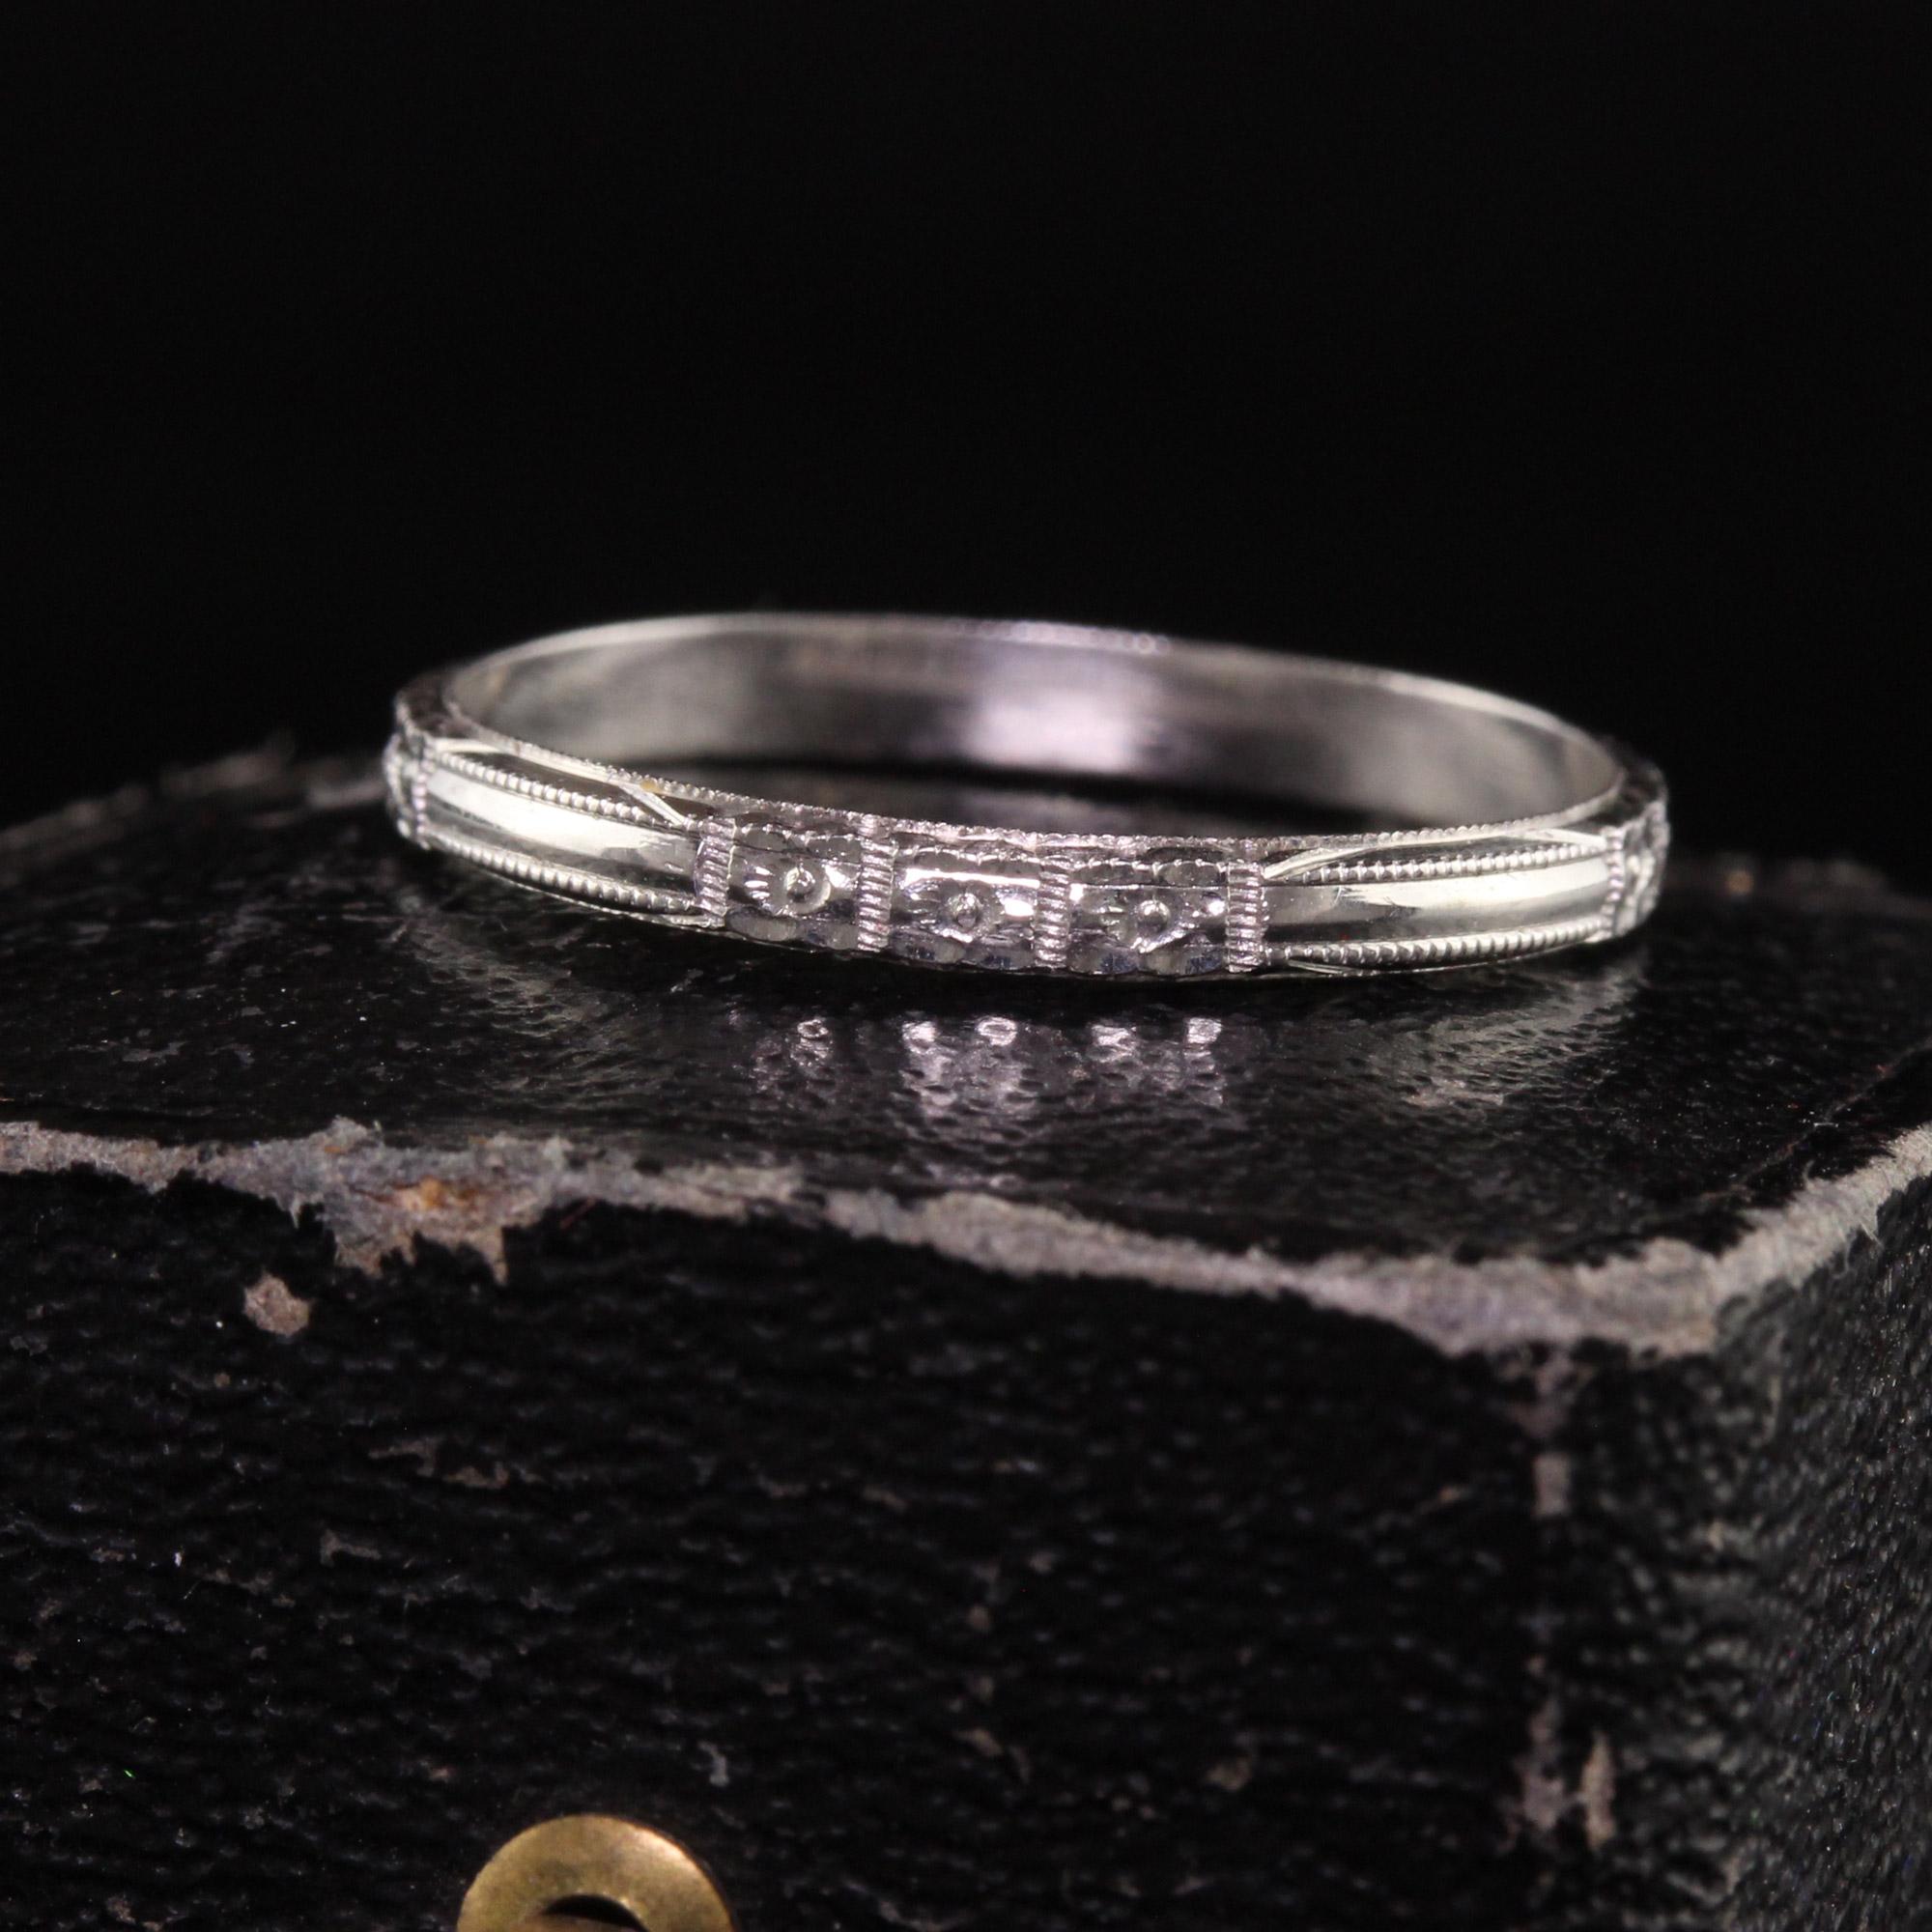 Beautiful Antique Art Deco 18K White Gold Blossom Engraved Wedding Band. This gorgeous band is crafted in 18K white gold. The ring is incredible condition and like new. The band has engravings on both the top and sides and looks amazing.

Item